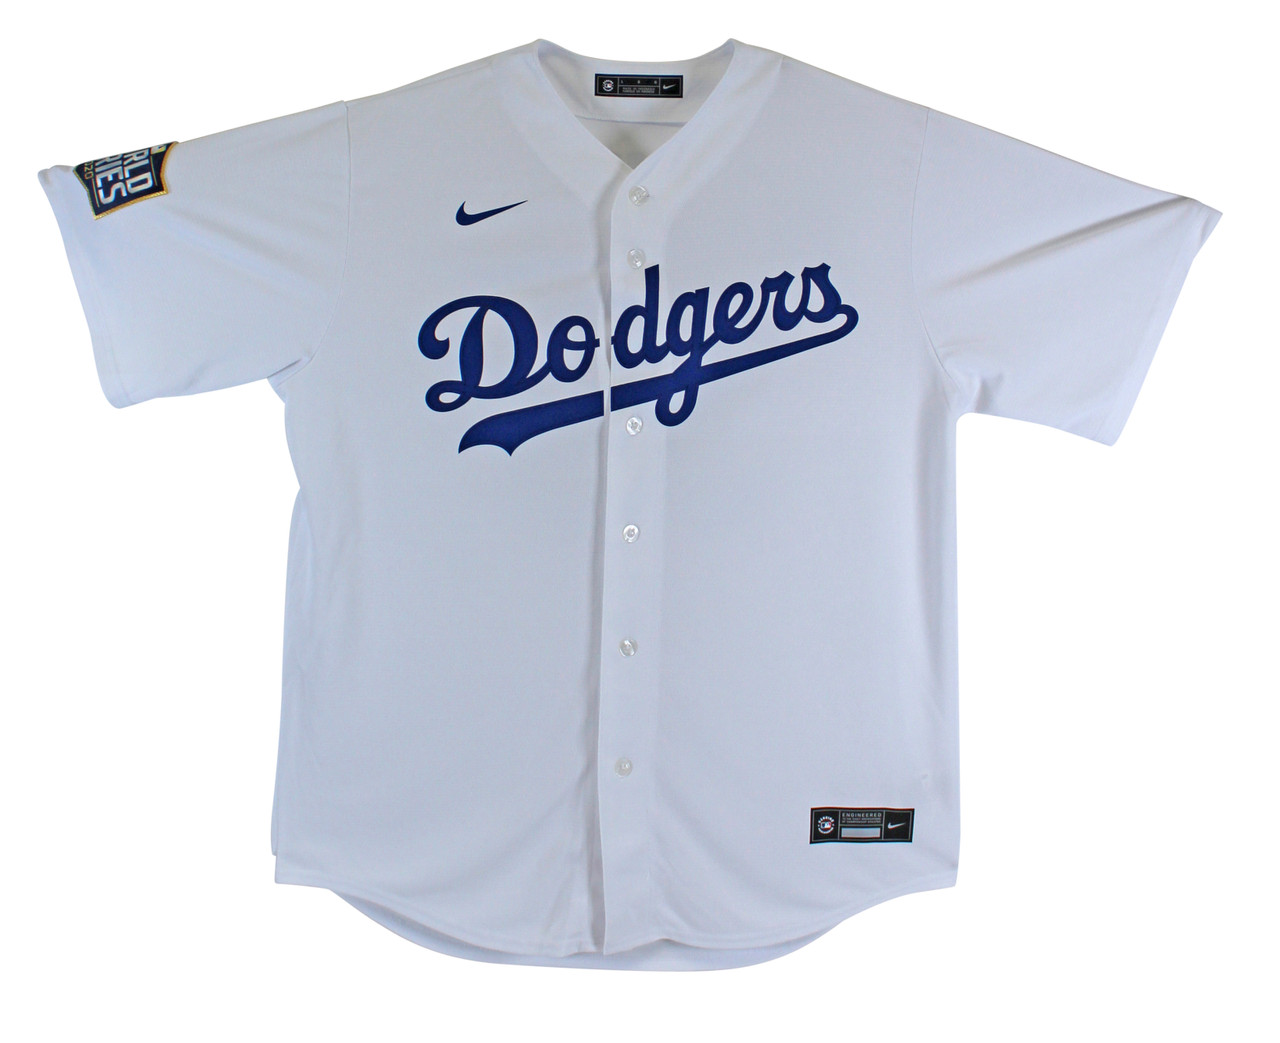 Fanatics Authentic Cody Bellinger Los Angeles Dodgers Autographed 2020 MLB World Series Champions Nike White Authentic Logo Jersey